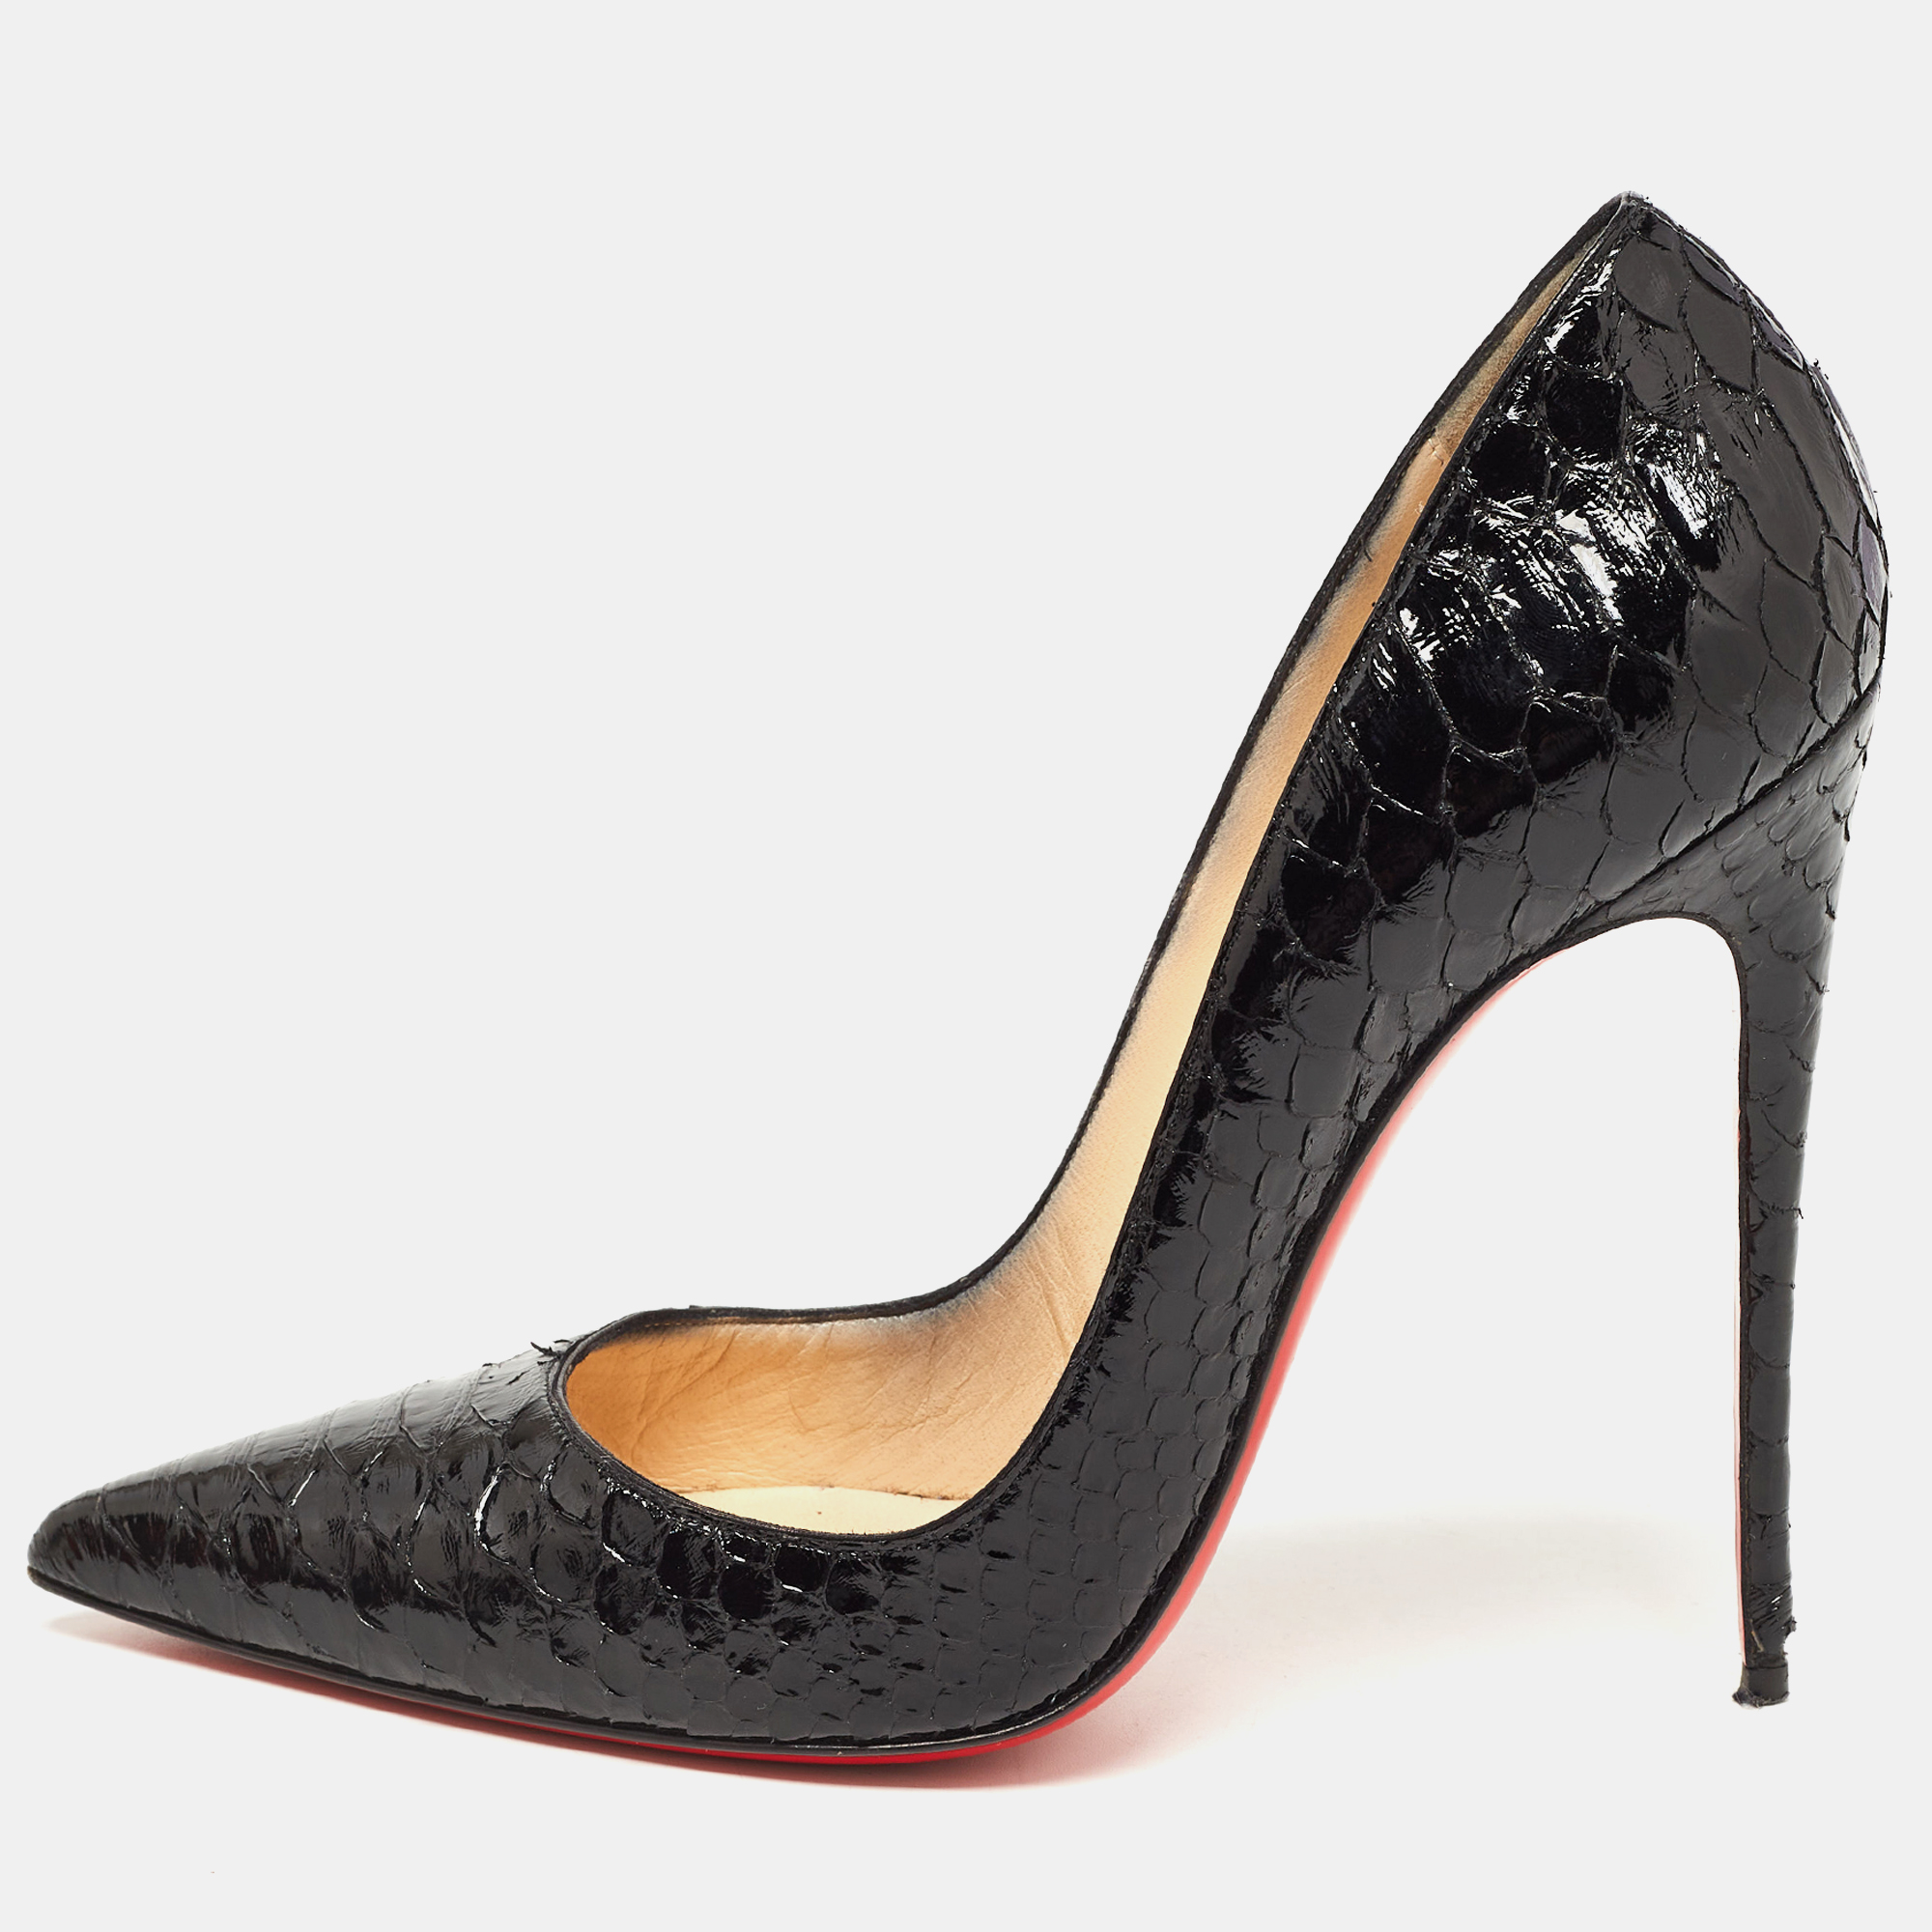 Perfectly sewn and finished to ensure an elegant look and fit these CL So Kate pumps in python leather are a purchase youll love flaunting. They look great on the feet.